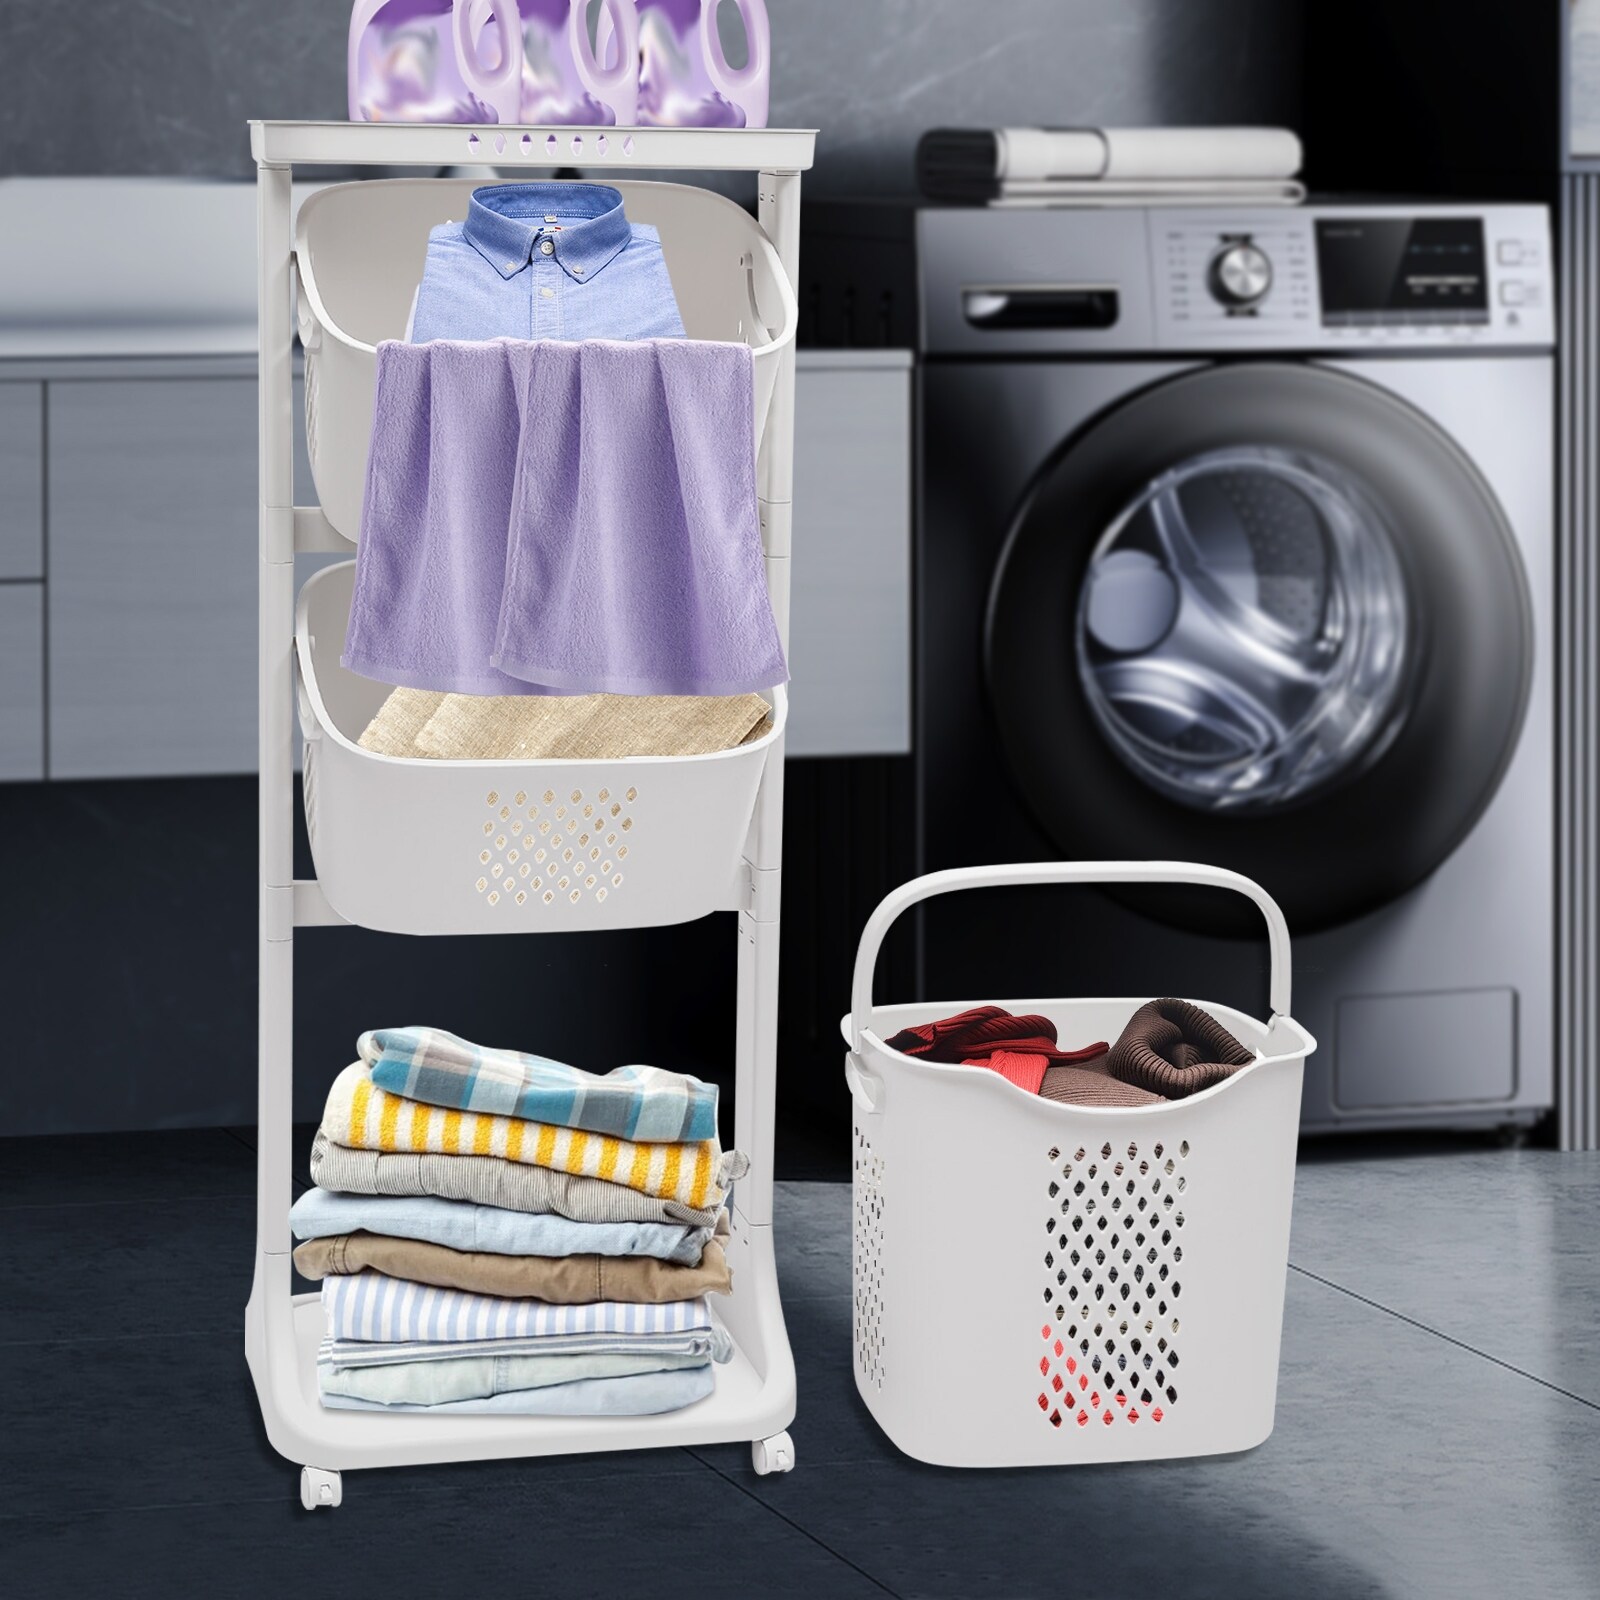 https://ak1.ostkcdn.com/images/products/is/images/direct/904c80b24d5805db2993da4449056f5adf9d41ff/3-layer-Laundry-Basket-Clothes-Storage-Basket-with-Universal-Wheel.jpg